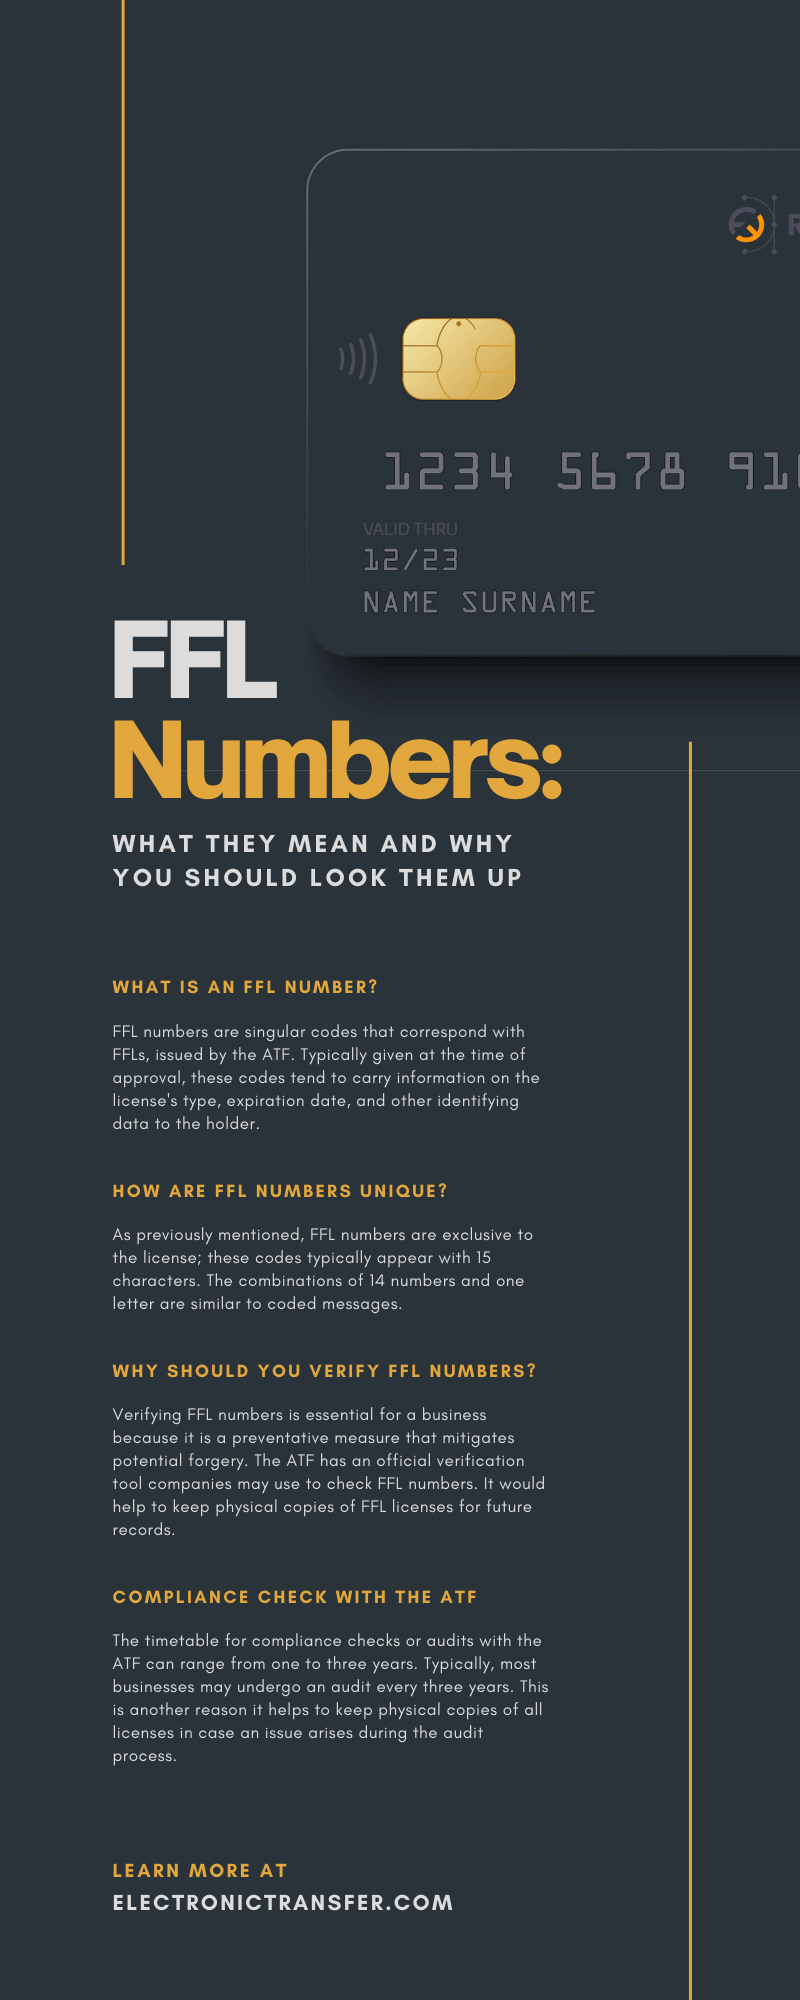 FFL Numbers: What They Mean and Why You Should Look Them Up